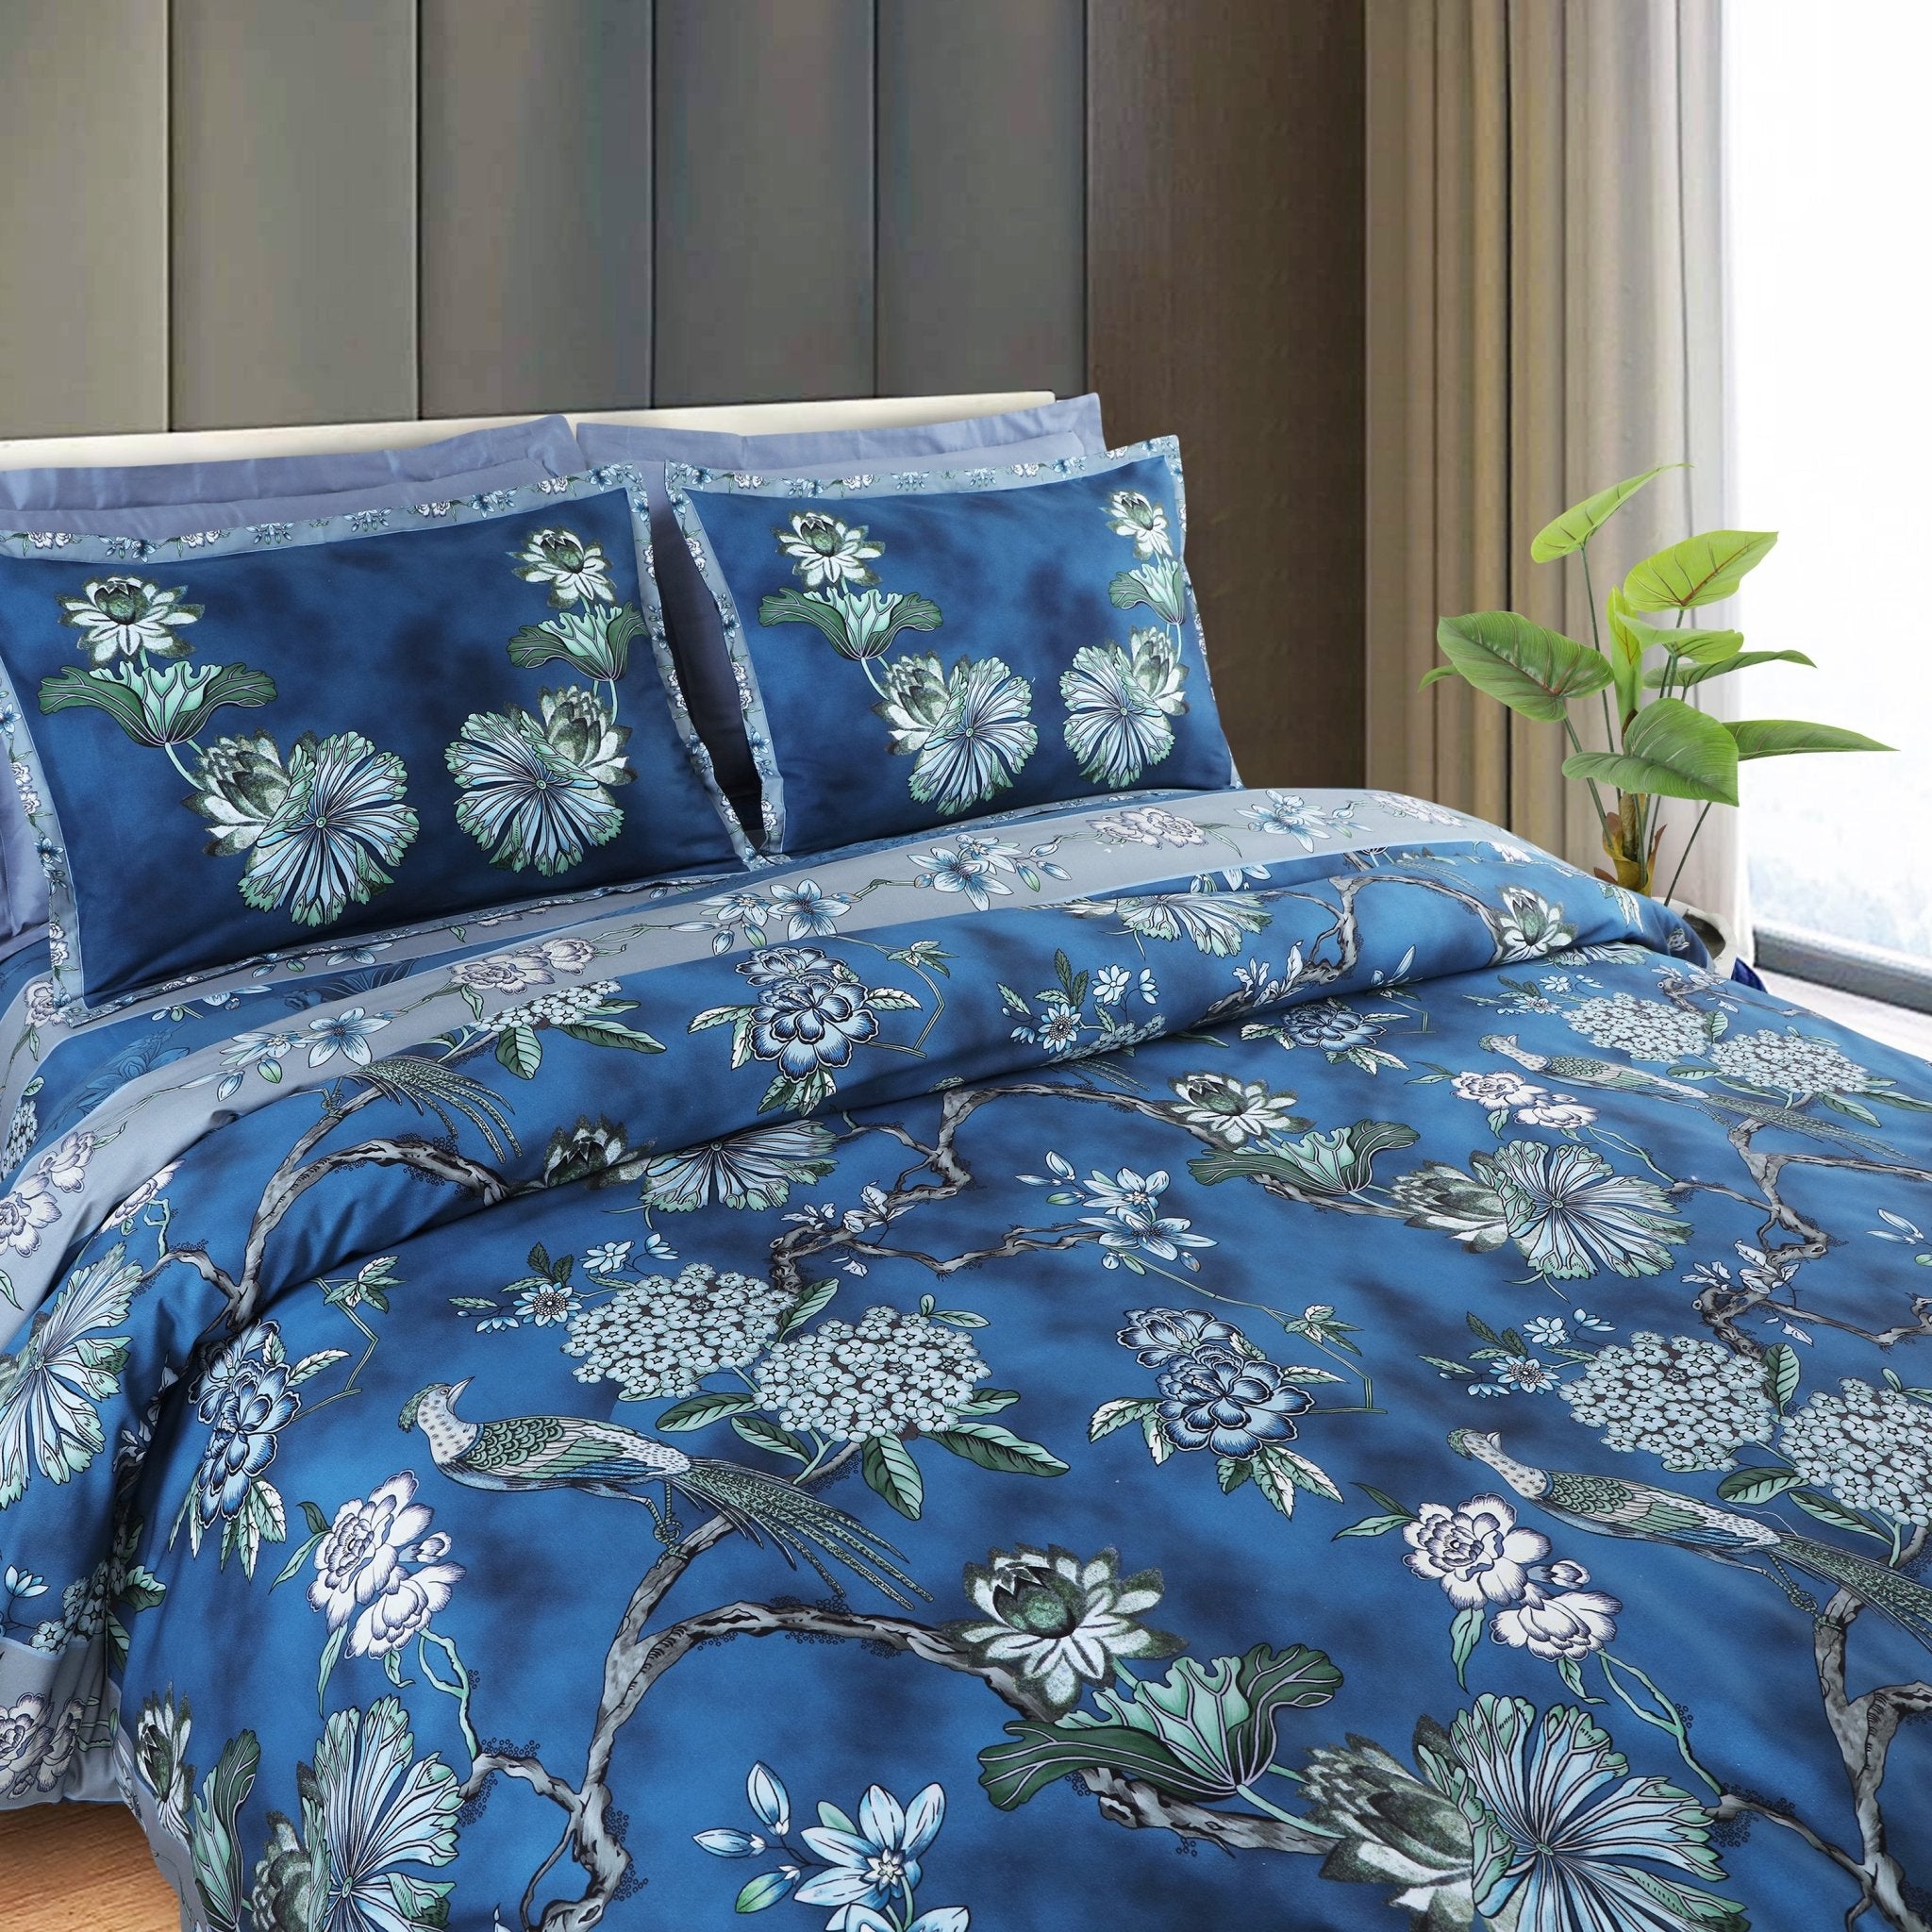 100% Cotton 350TC Blue Ethnic Sion Bedding Collection - MALAKO